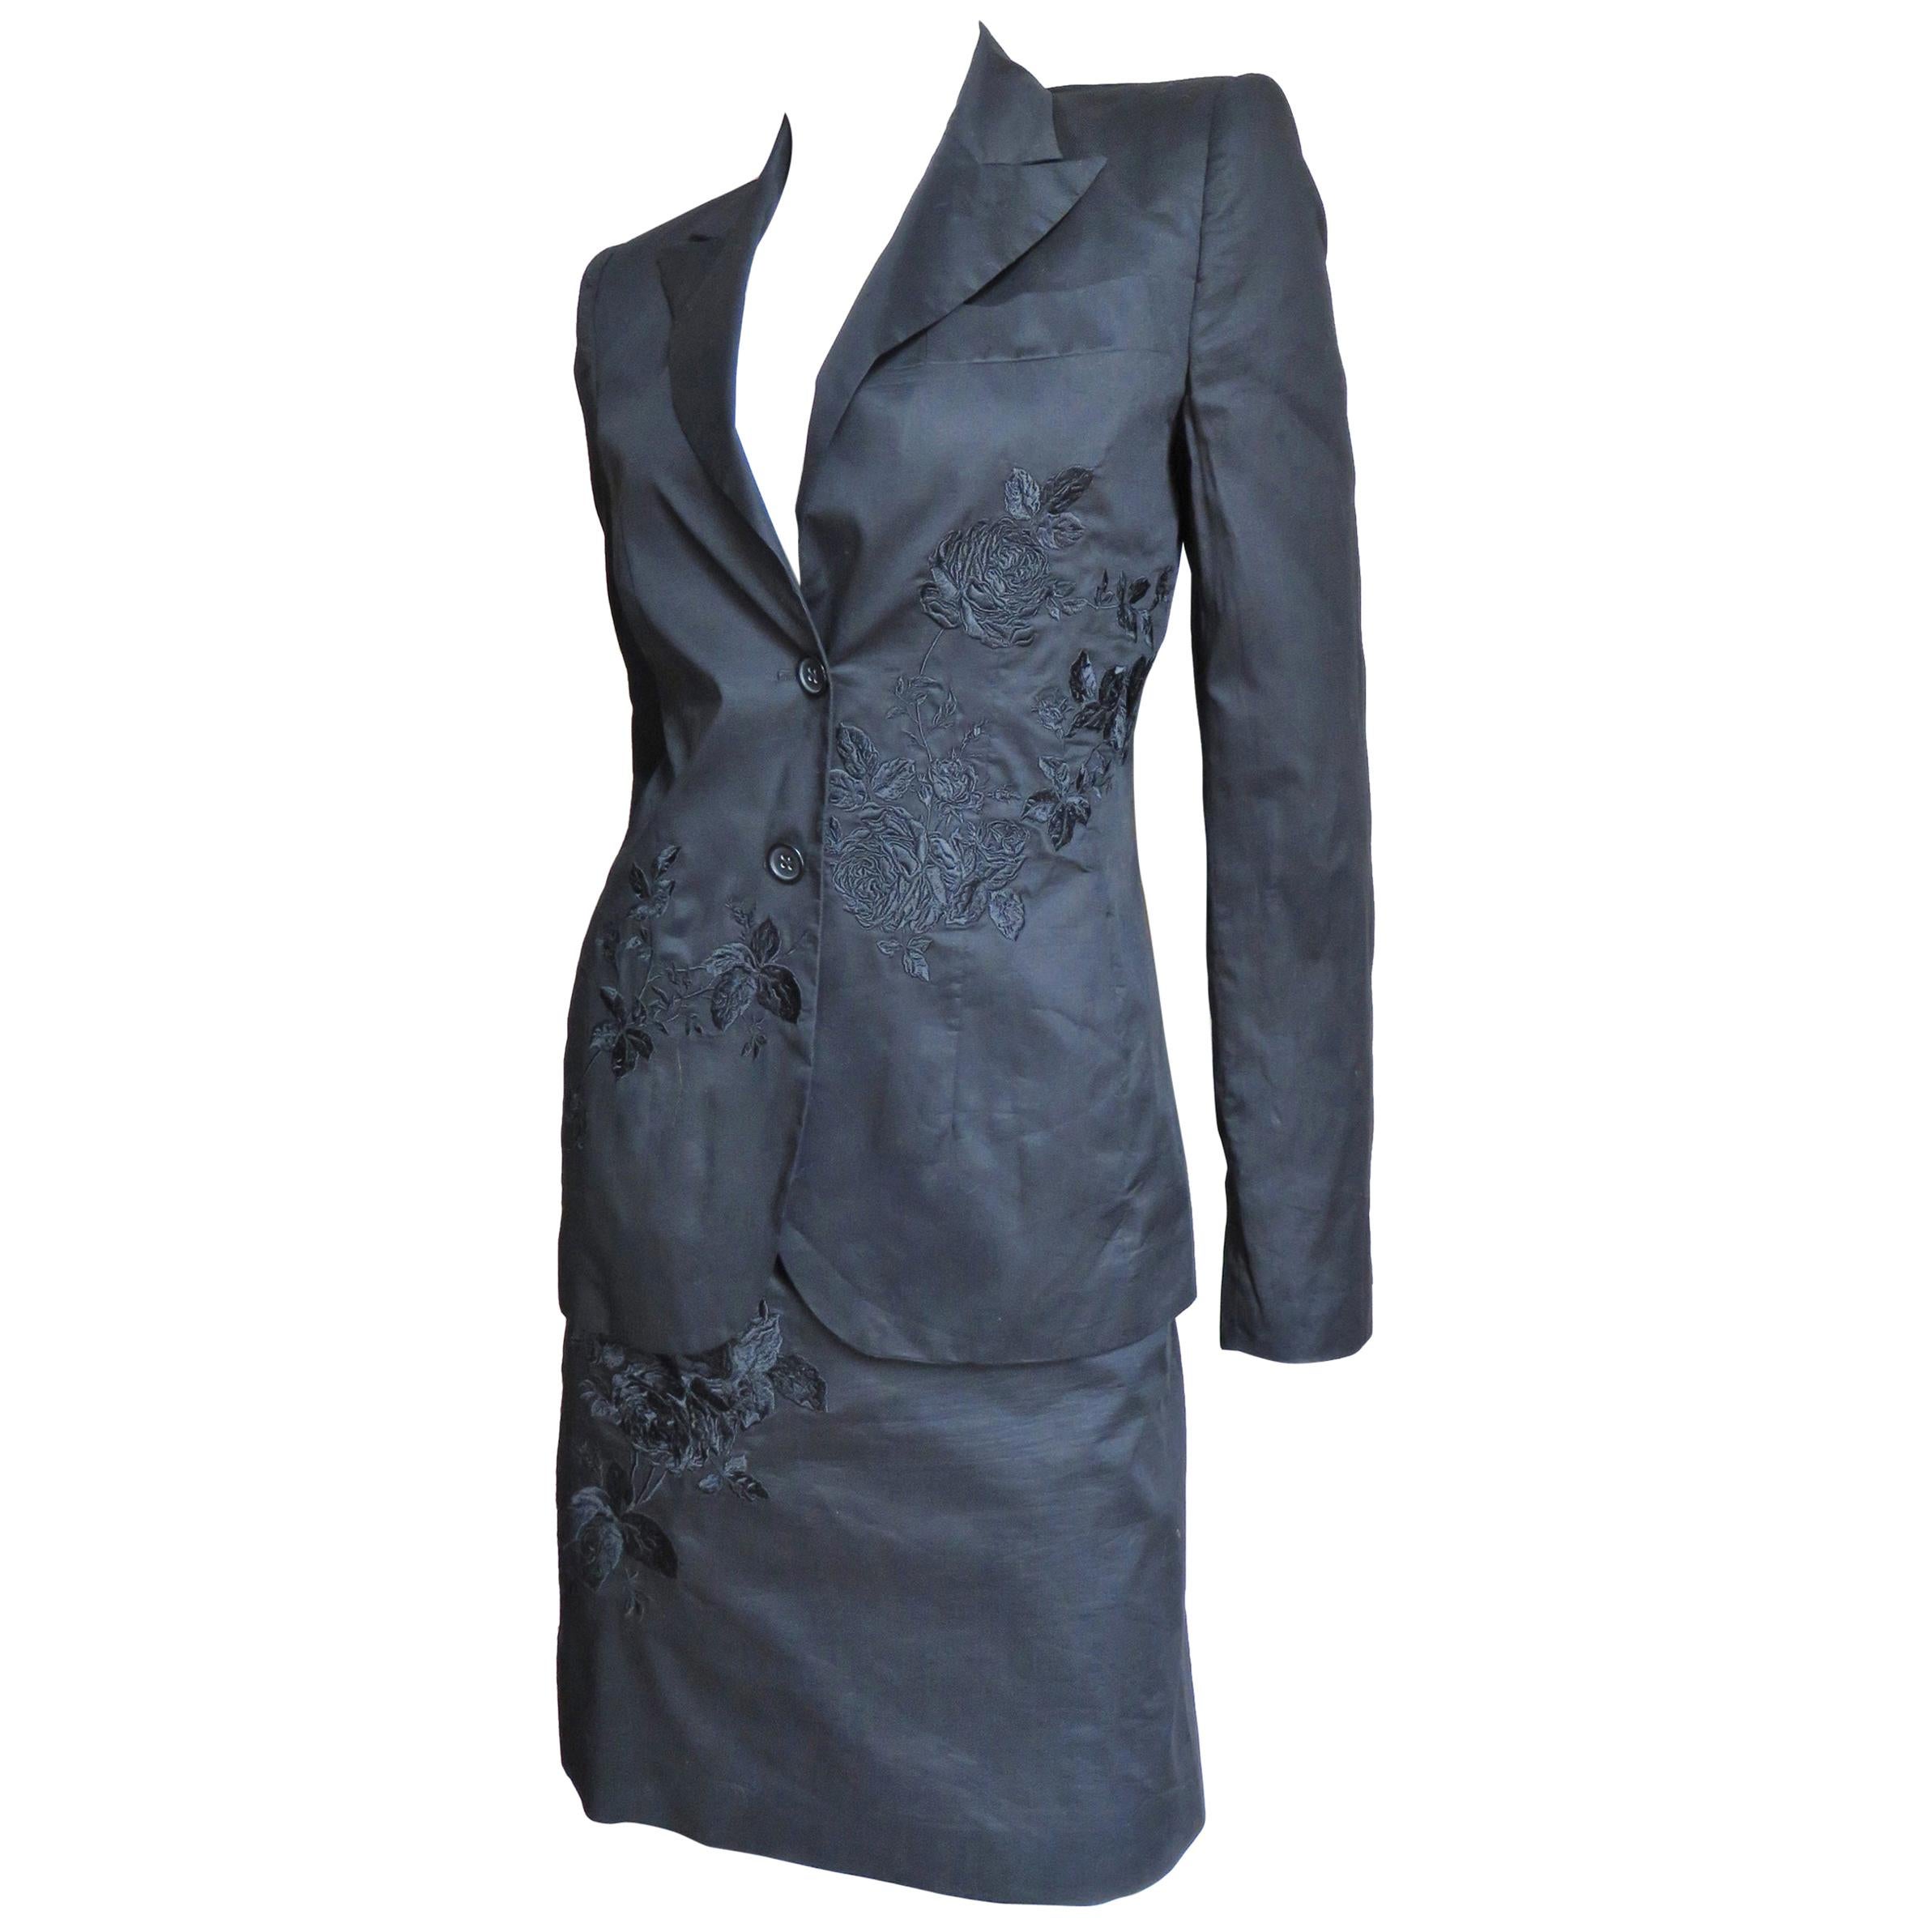 Alexander McQueen New S/S 2002 Three Piece Skirt Suit with Embroidery